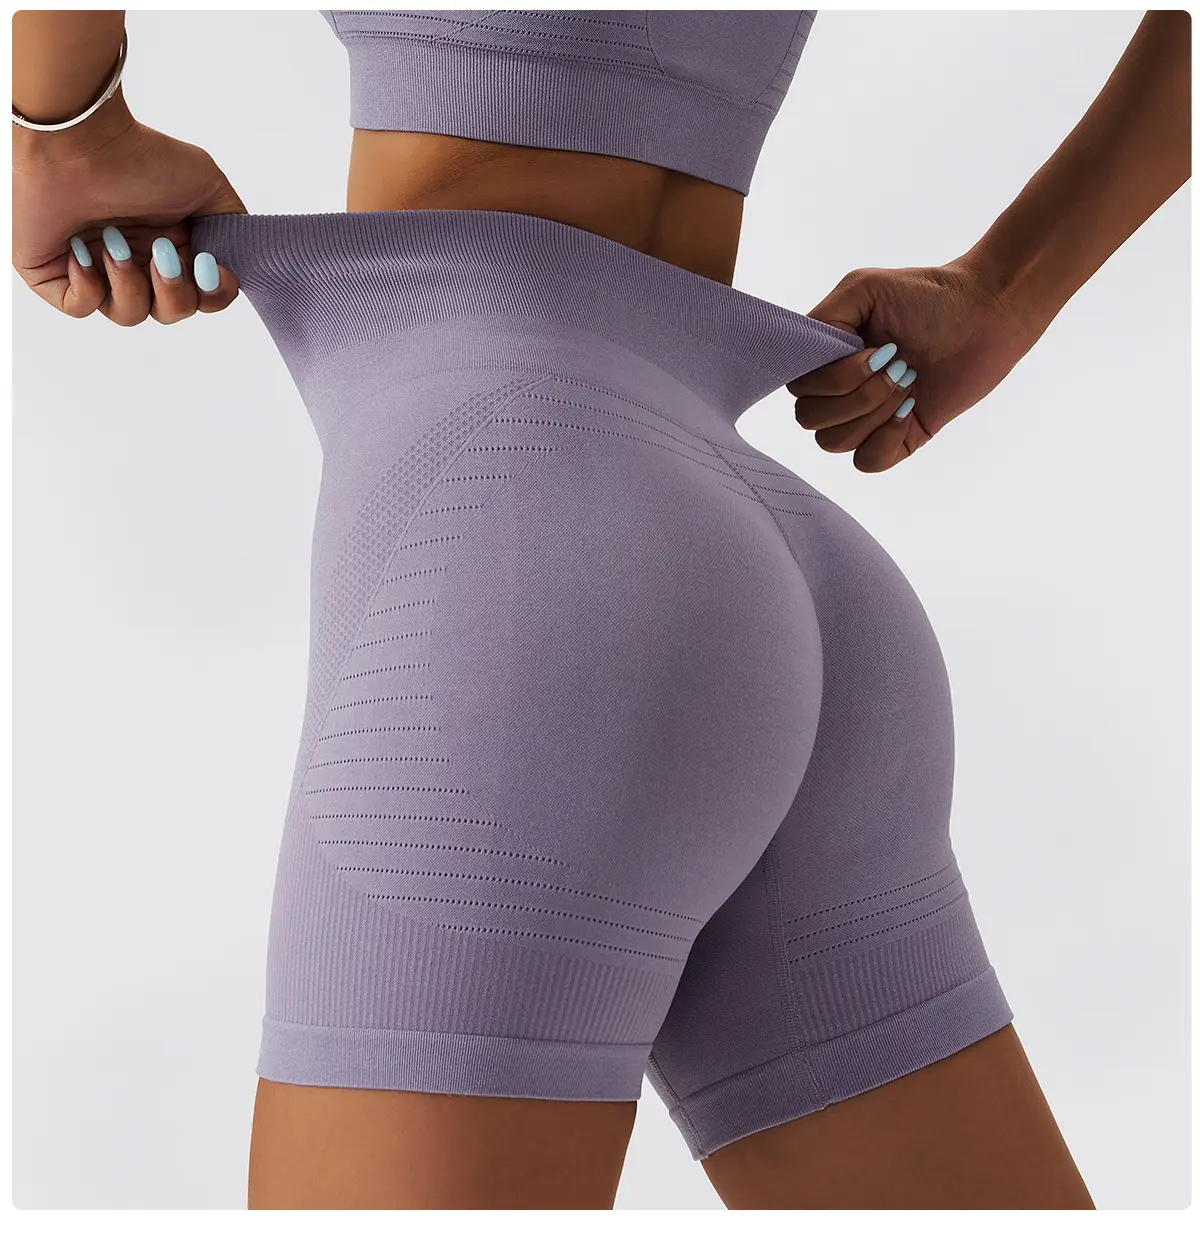 women's sports running gym workout shorts butt lift legging yoga outfit seamless comfy breathable fitness bike shorts